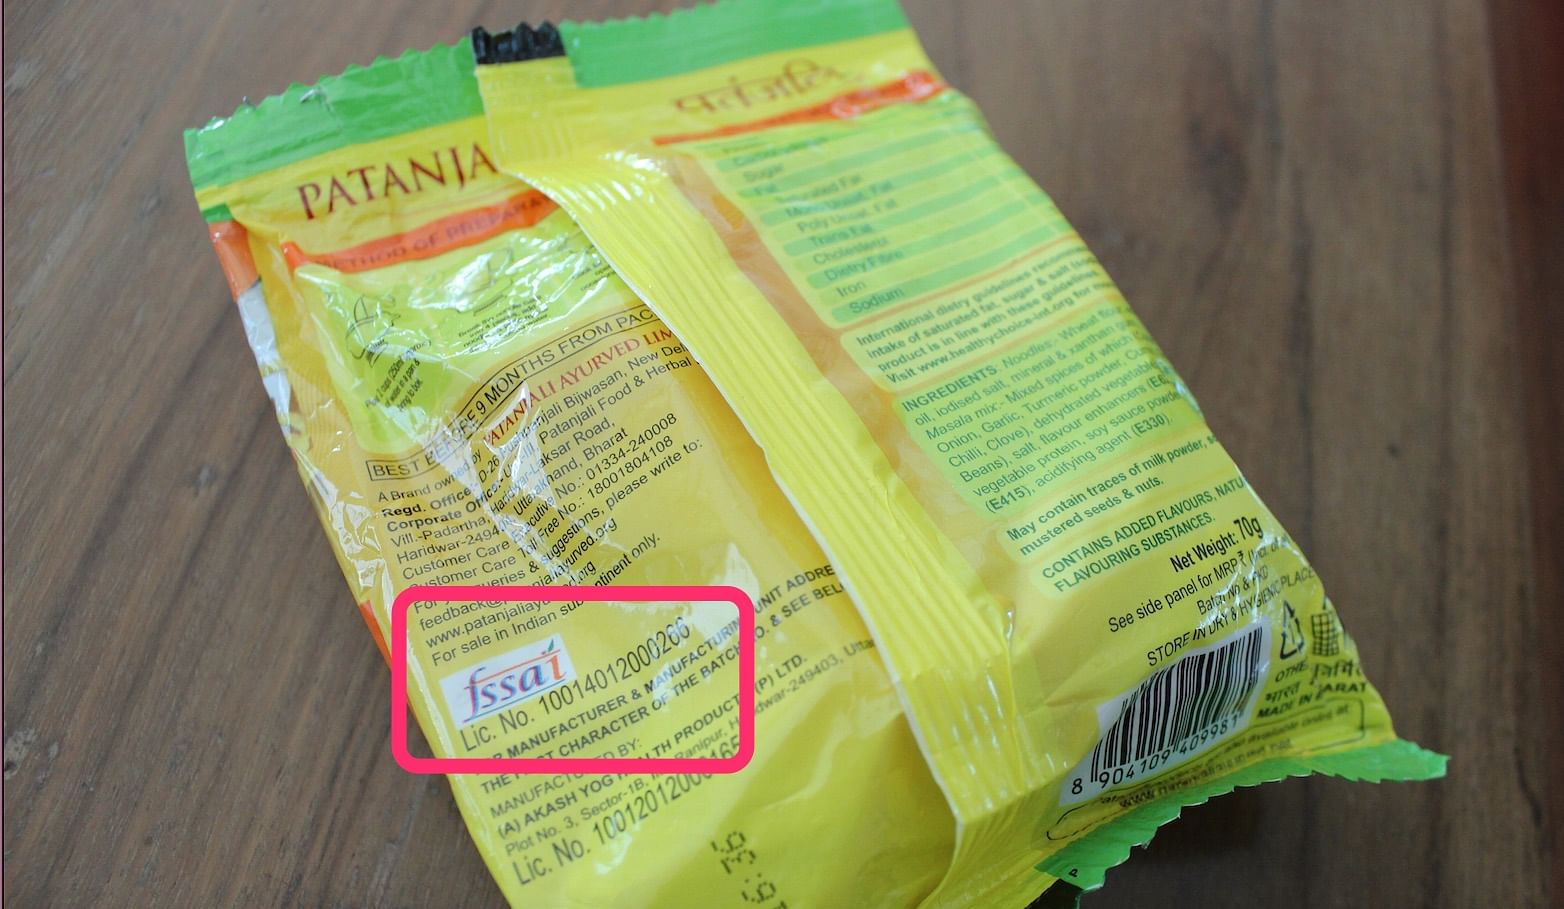 A Patanjali Atta Noodle packet showing the FSSAI licence. (Photo: Aaqib Raza Khan/ The Quint)